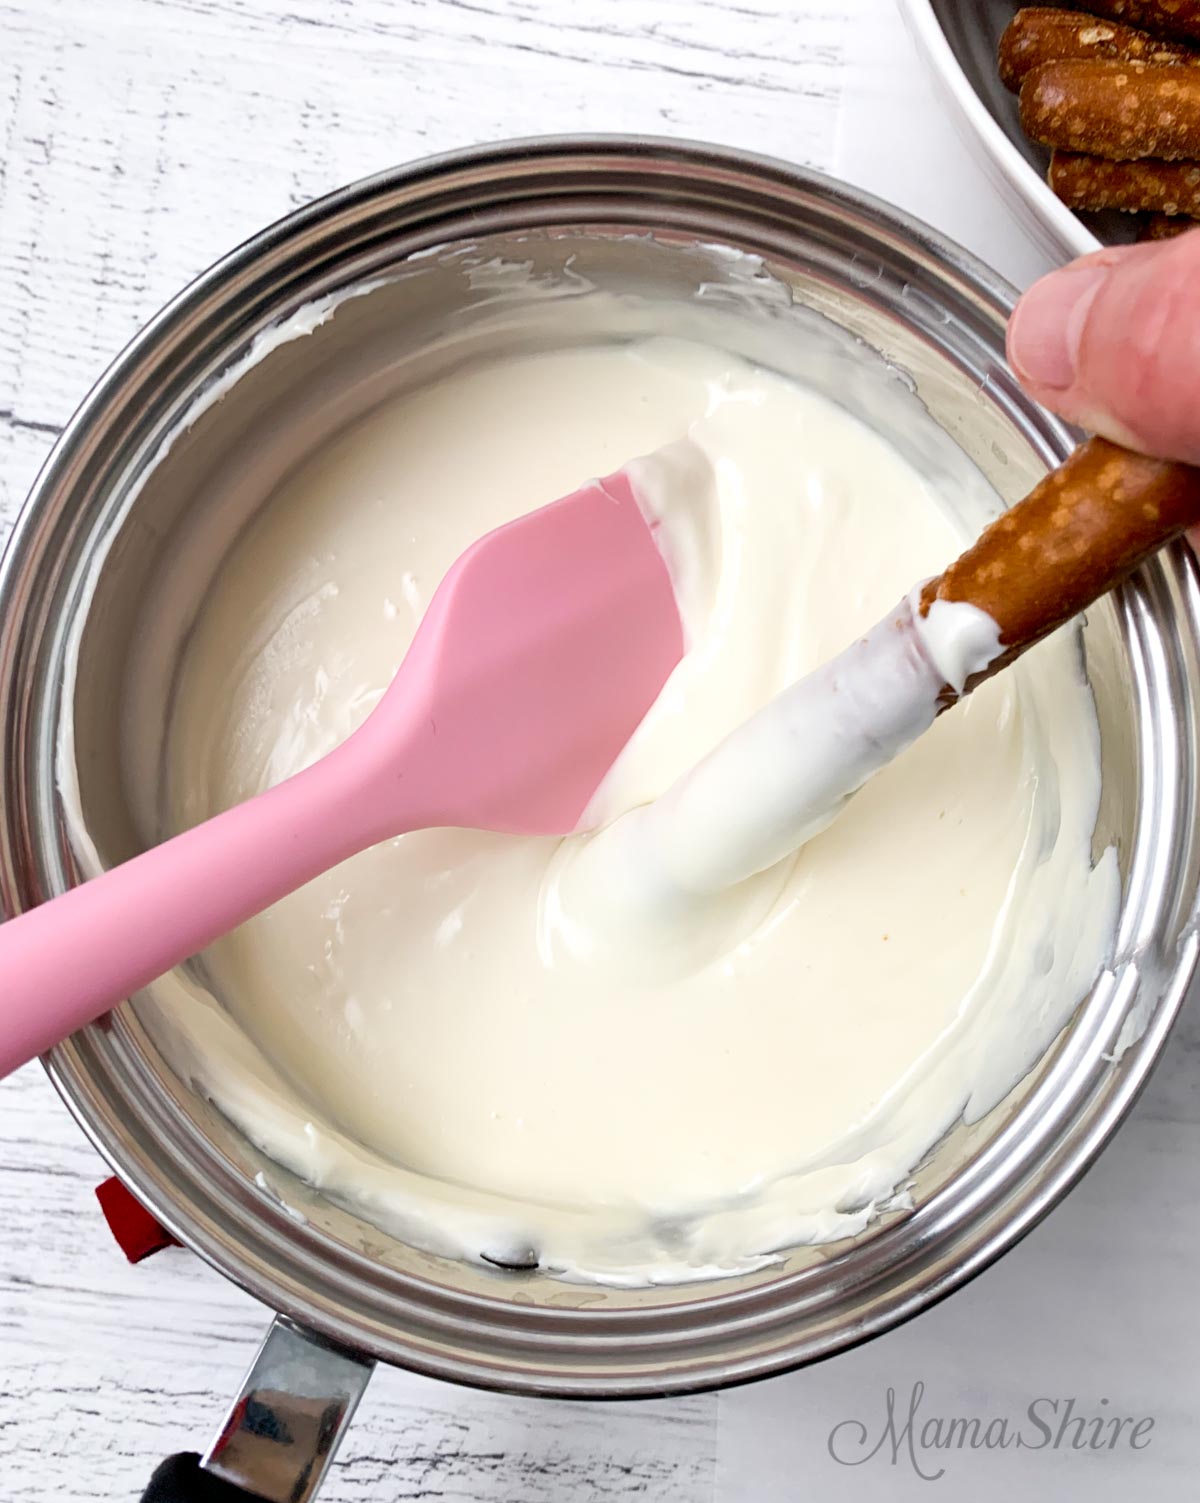 A pan with melted white icing and a pink spatula to help spread icing onto the pretzel rod.